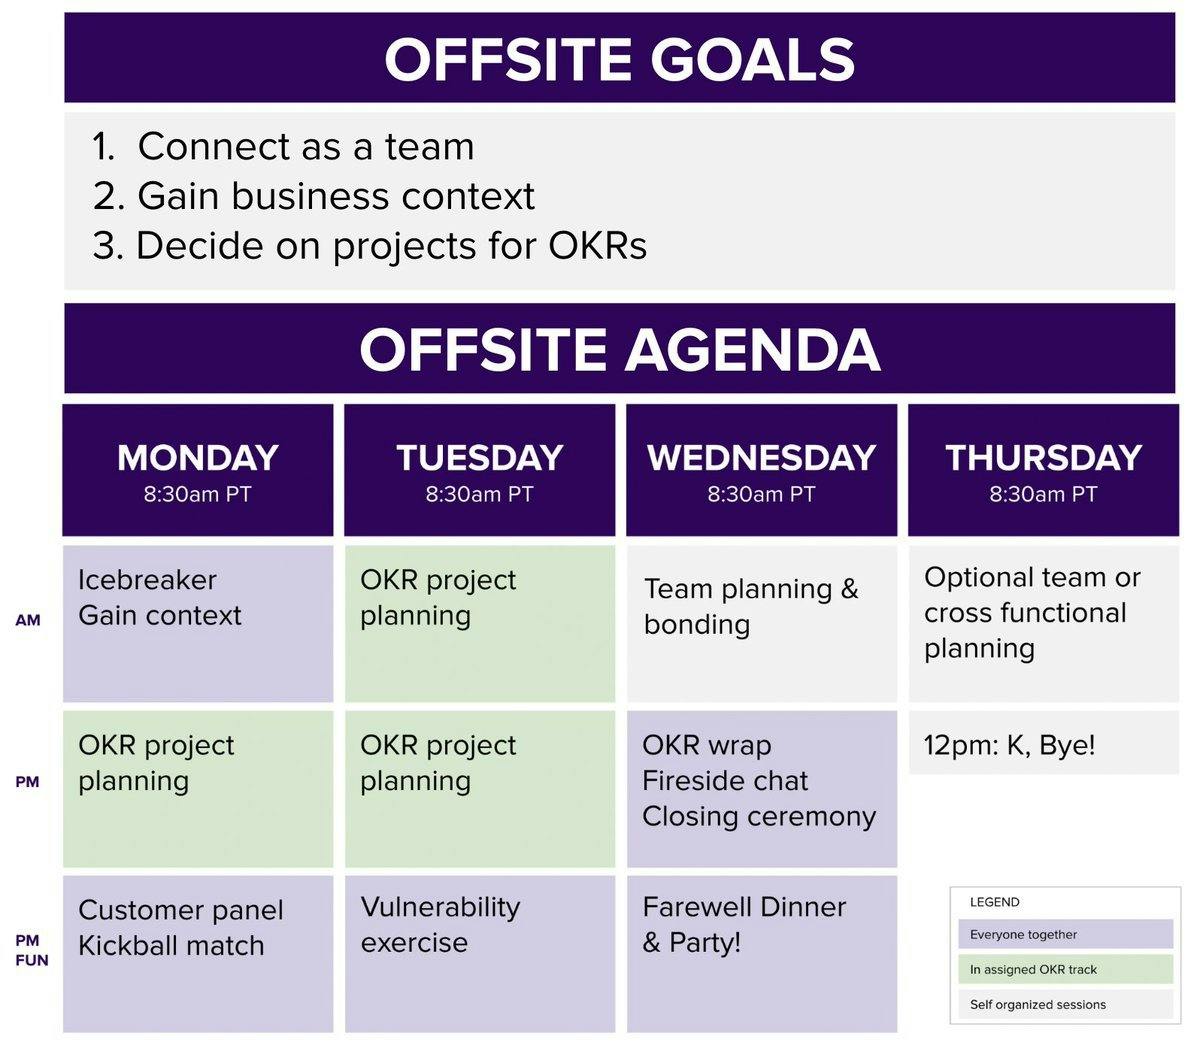 Agenda used by Mutiny for offsites